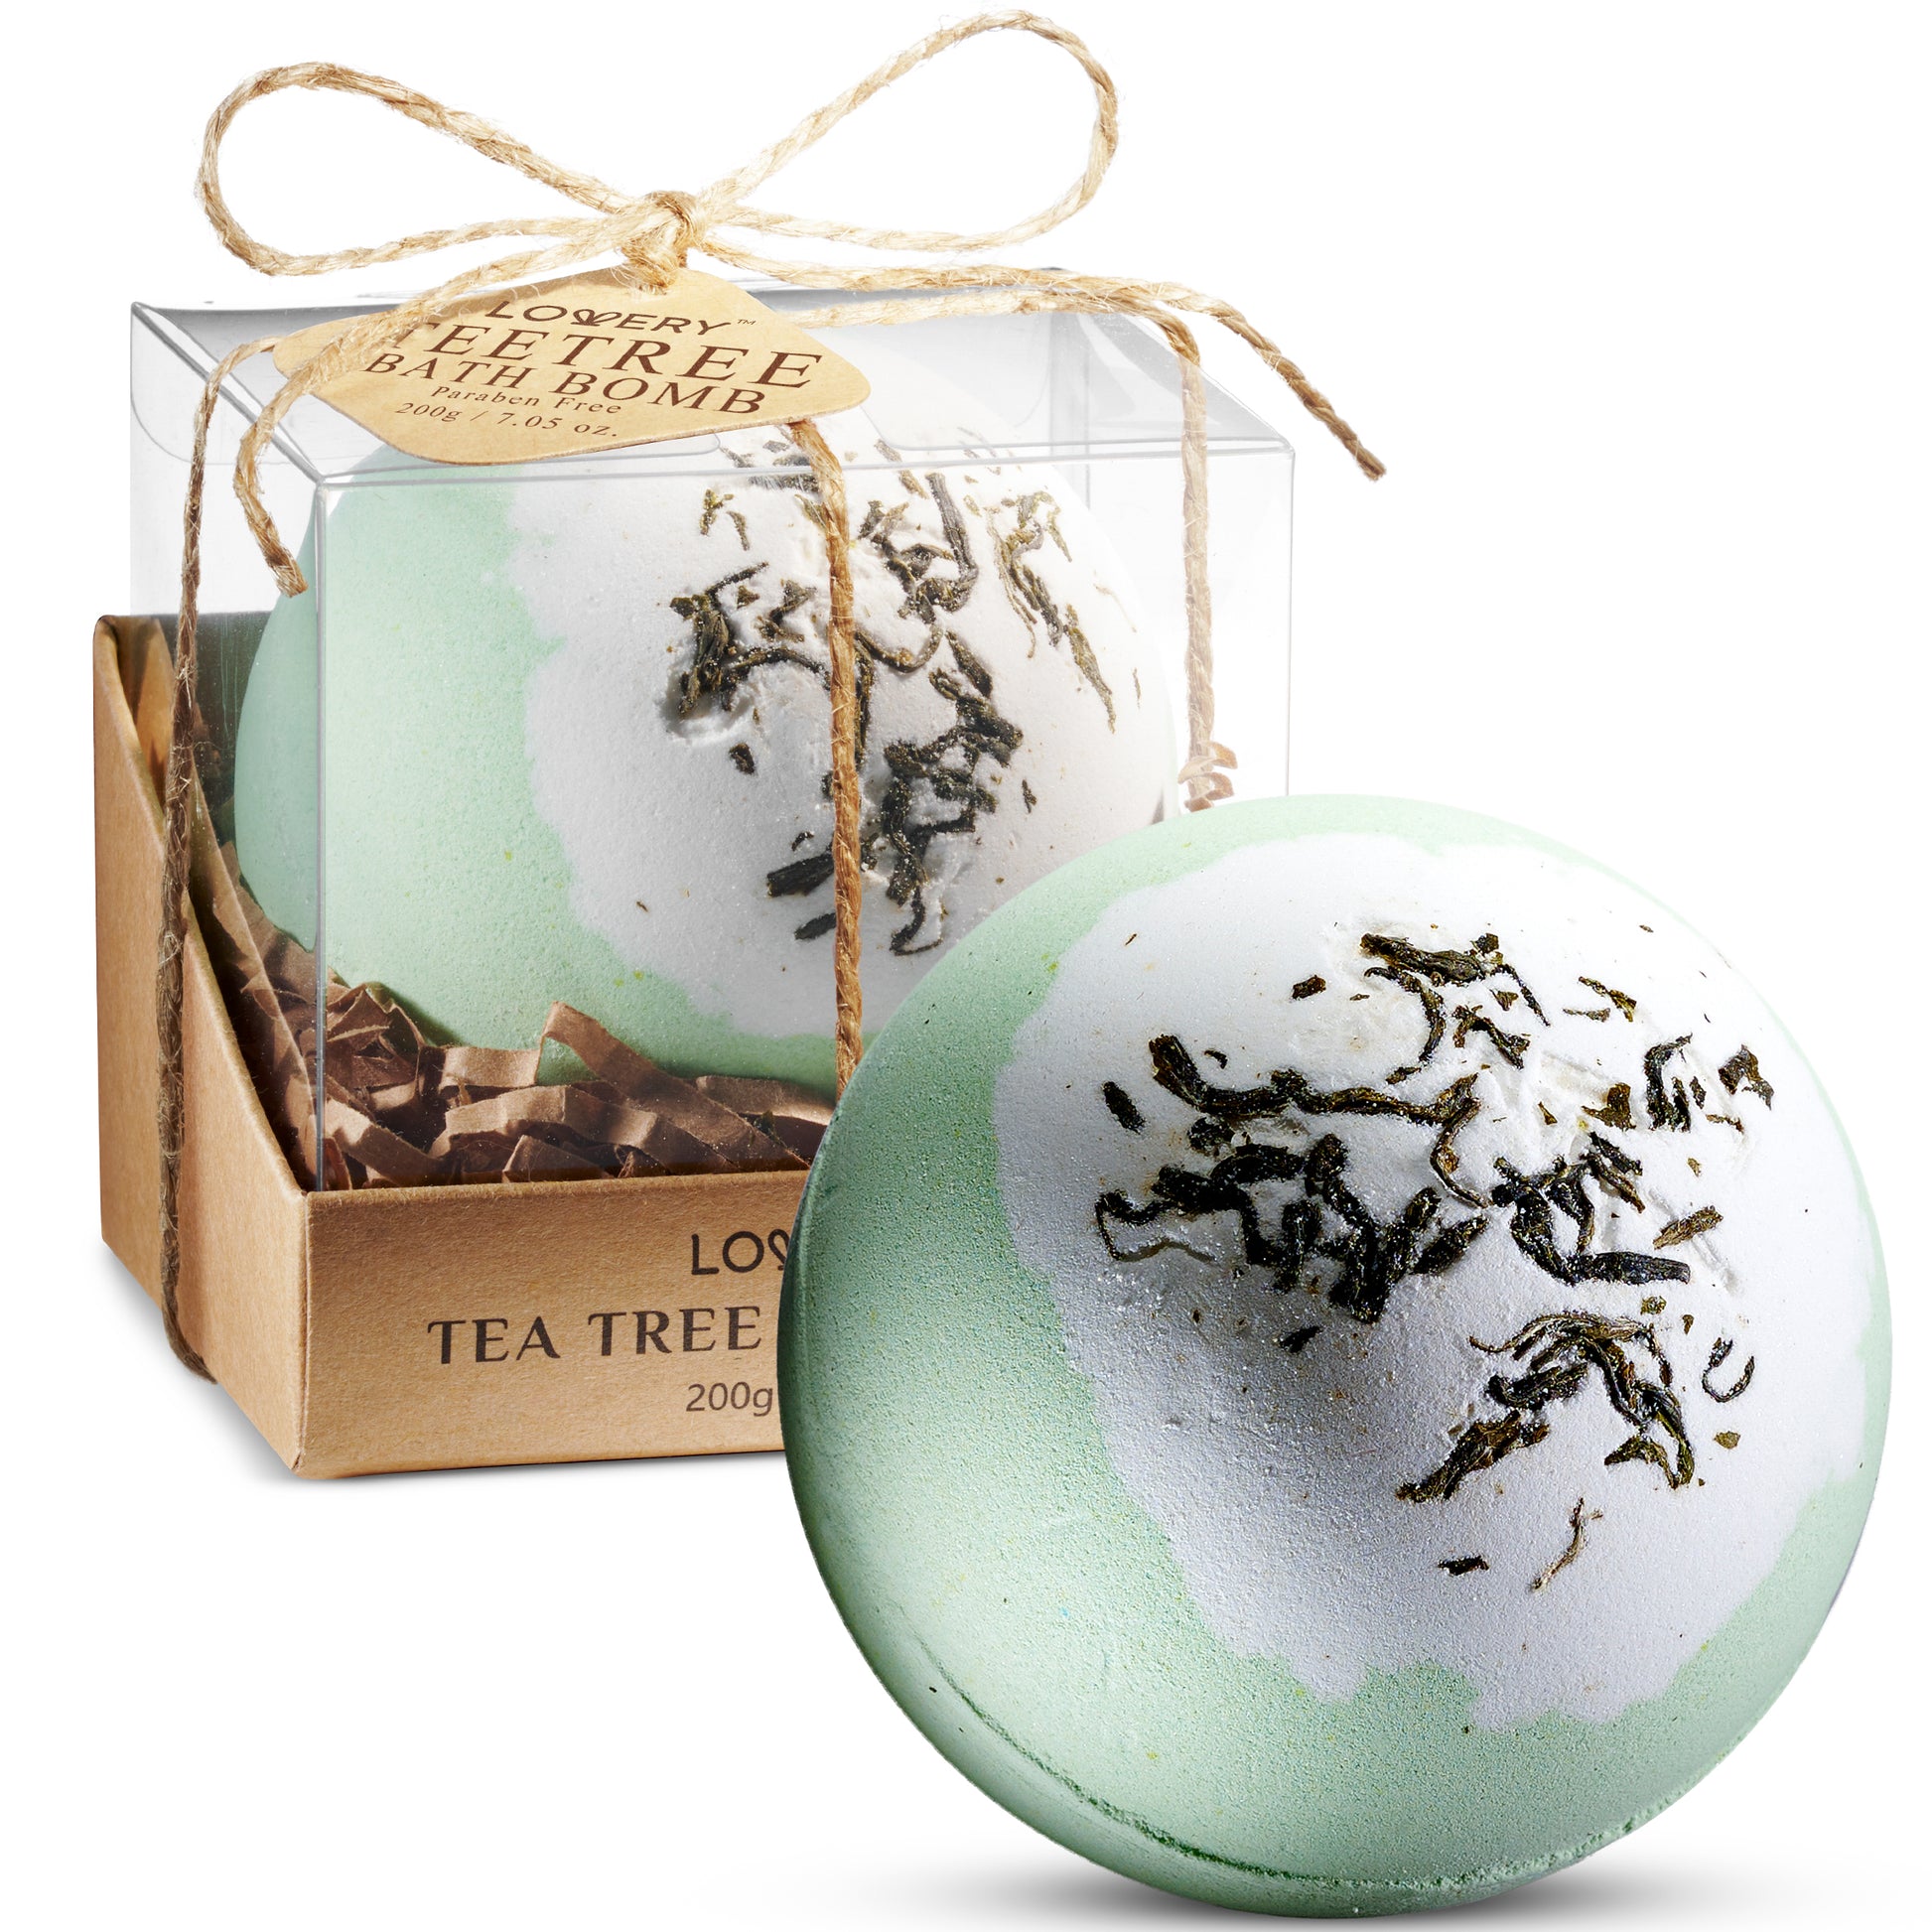 lovery tea tree bath bomb, Tea Tree Bath Bomb, Handmade Spa Fizzy, 7oz Clean Ingredient Spa Ball, Tea Tree Oil Benefits for Skin, Soothing and Antifungal Properties, Relief for Painful and Irritated Skin, Reduction of Redness and Swelling, Nourishing Bath Essentials with Vitamin E, Shea Butter Spa - Cruelty-Free, Paraben-Free Bath Bombs, Vegan-Friendly Handmade Self-Care